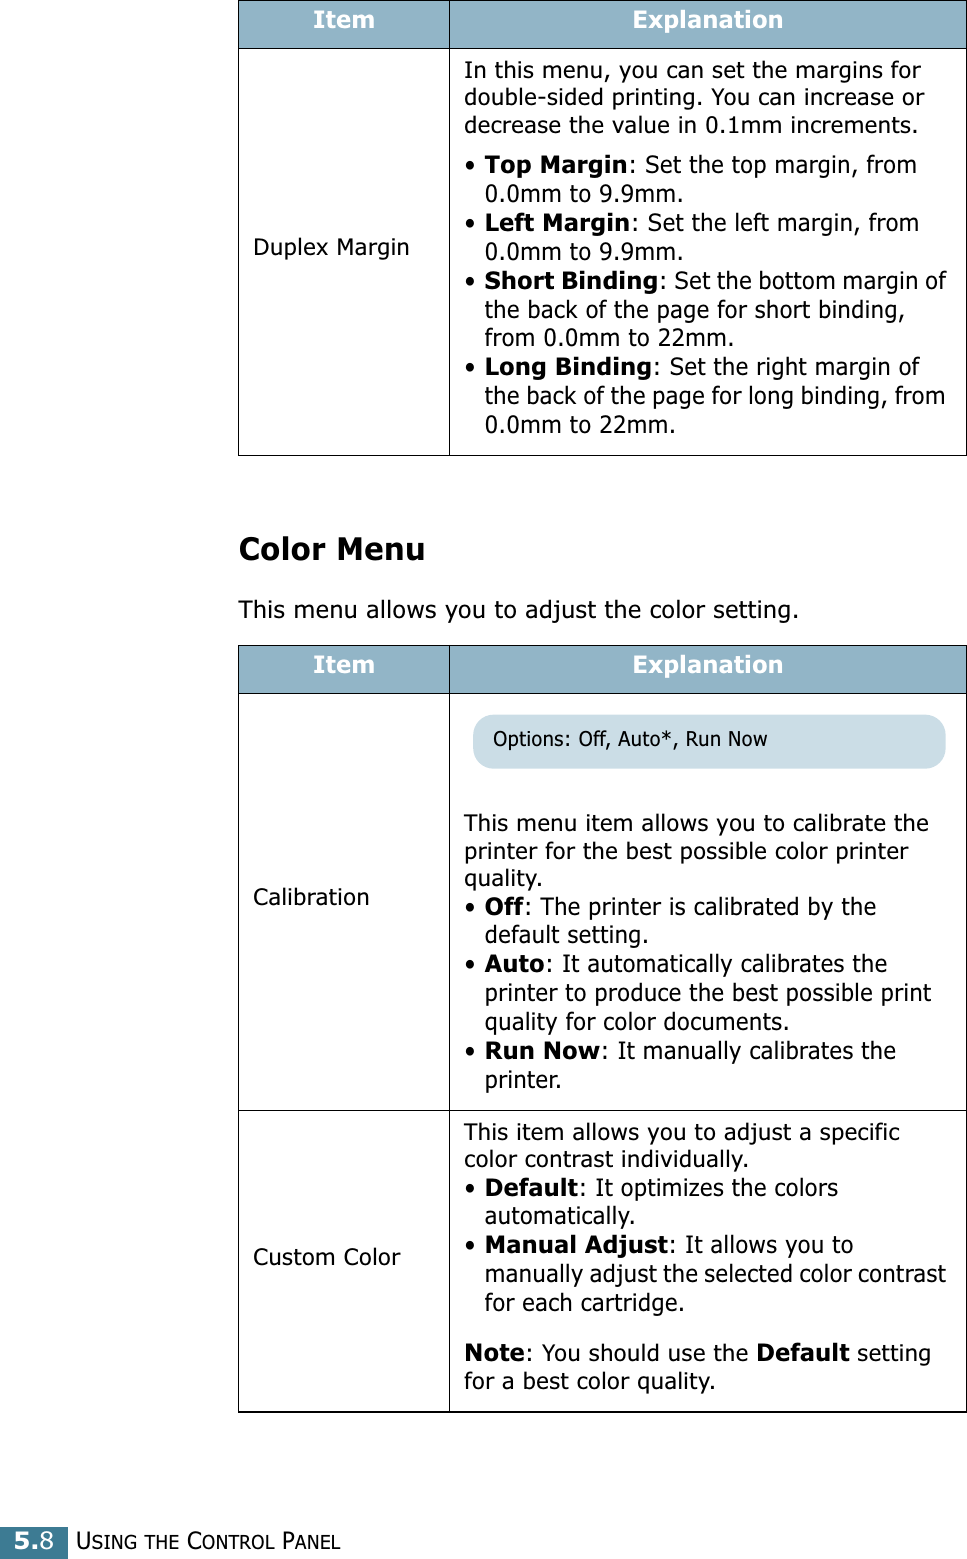 USING THE CONTROL PANEL5.8Color MenuThis menu allows you to adjust the color setting. Duplex MarginIn this menu, you can set the margins for double-sided printing. You can increase or decrease the value in 0.1mm increments.•Top Margin: Set the top margin, from 0.0mm to 9.9mm.•Left Margin: Set the left margin, from 0.0mm to 9.9mm.•Short Binding: Set the bottom margin of the back of the page for short binding, from 0.0mm to 22mm. •Long Binding: Set the right margin of the back of the page for long binding, from 0.0mm to 22mm.Item ExplanationCalibrationThis menu item allows you to calibrate the printer for the best possible color printer quality.•Off: The printer is calibrated by the default setting.•Auto: It automatically calibrates the printer to produce the best possible print quality for color documents.•Run Now: It manually calibrates the printer.Custom ColorThis item allows you to adjust a specific color contrast individually. •Default: It optimizes the colors automatically. •Manual Adjust: It allows you to manually adjust the selected color contrast for each cartridge.Note: You should use the Default setting for a best color quality.Item ExplanationOptions: Off, Auto*, Run Now